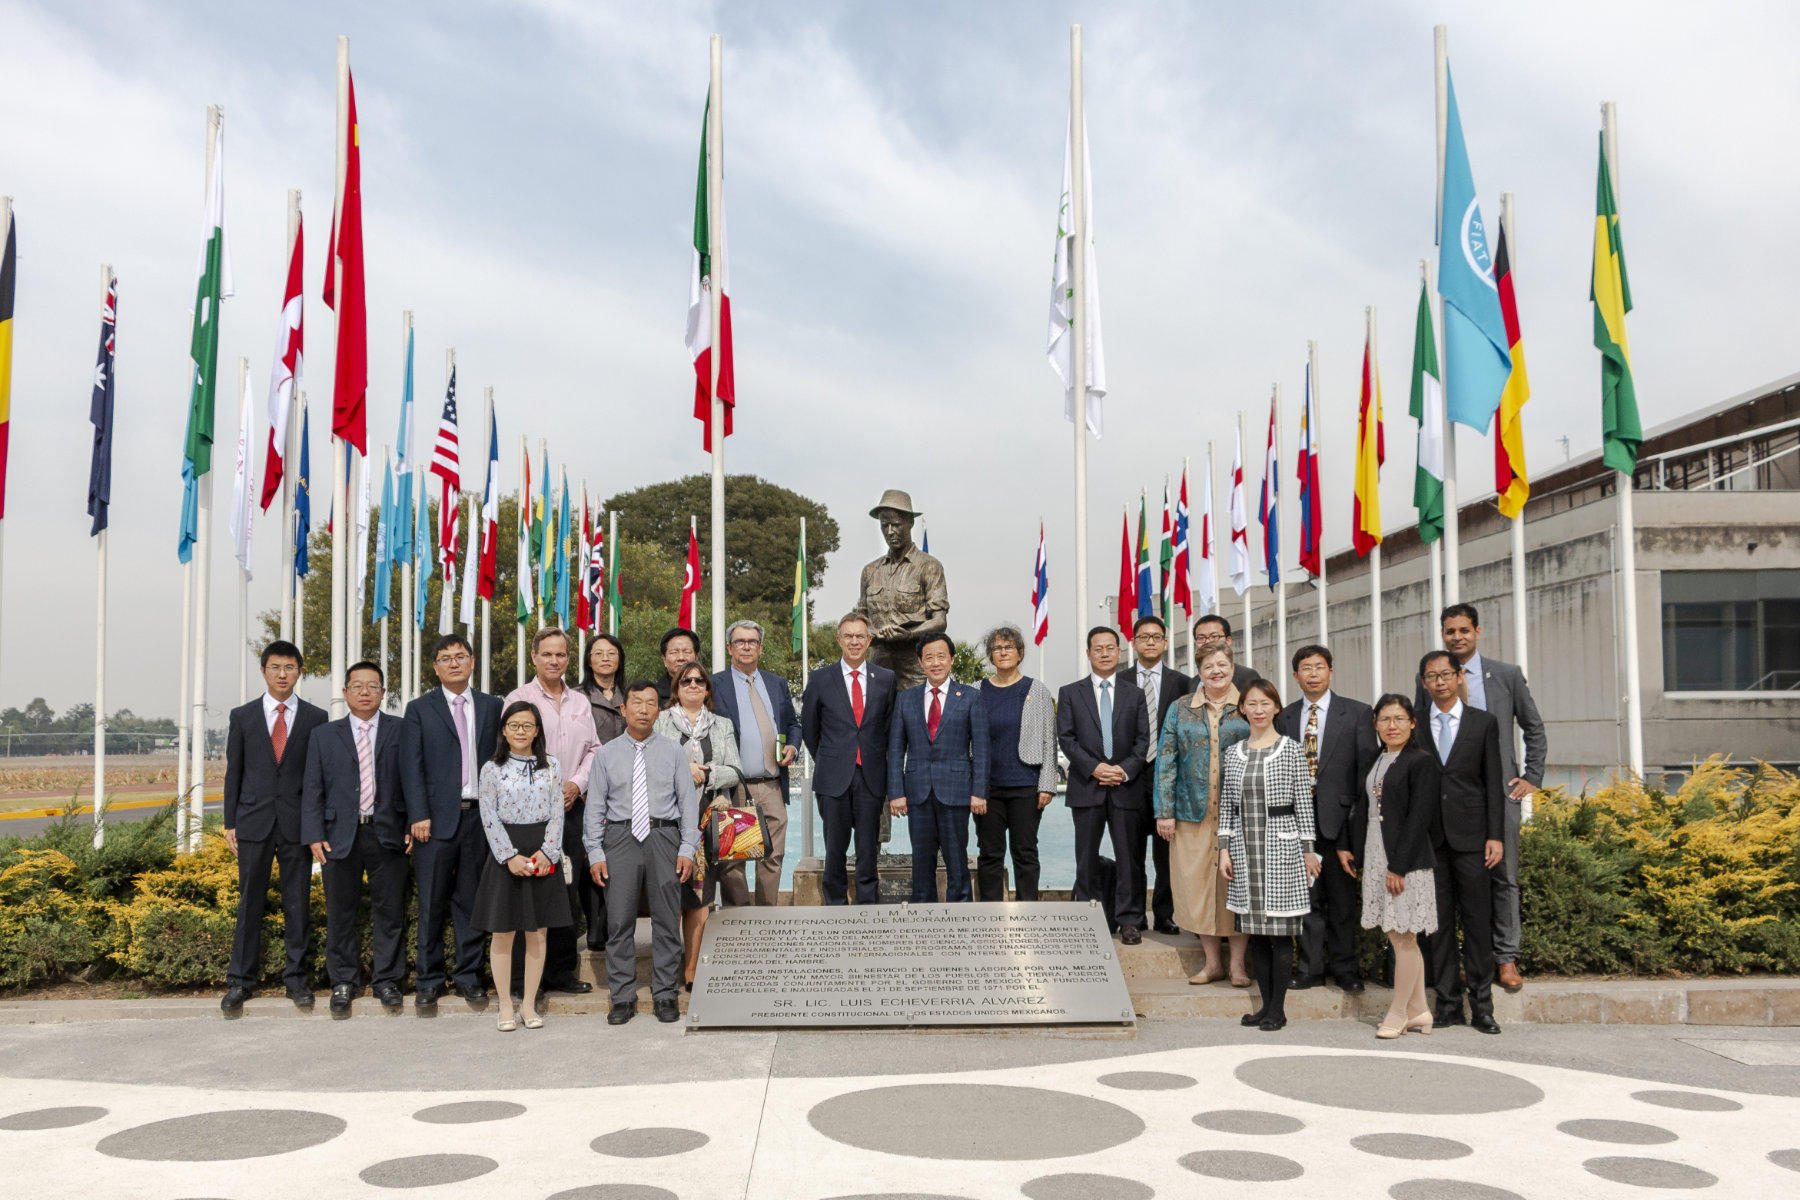 Vice minister Qu (center) and his delegation stand for a group photo with CIMMYT's leadership and Chinese students and scientists. (Photo: Gerardo Mejía/CIMMYT)